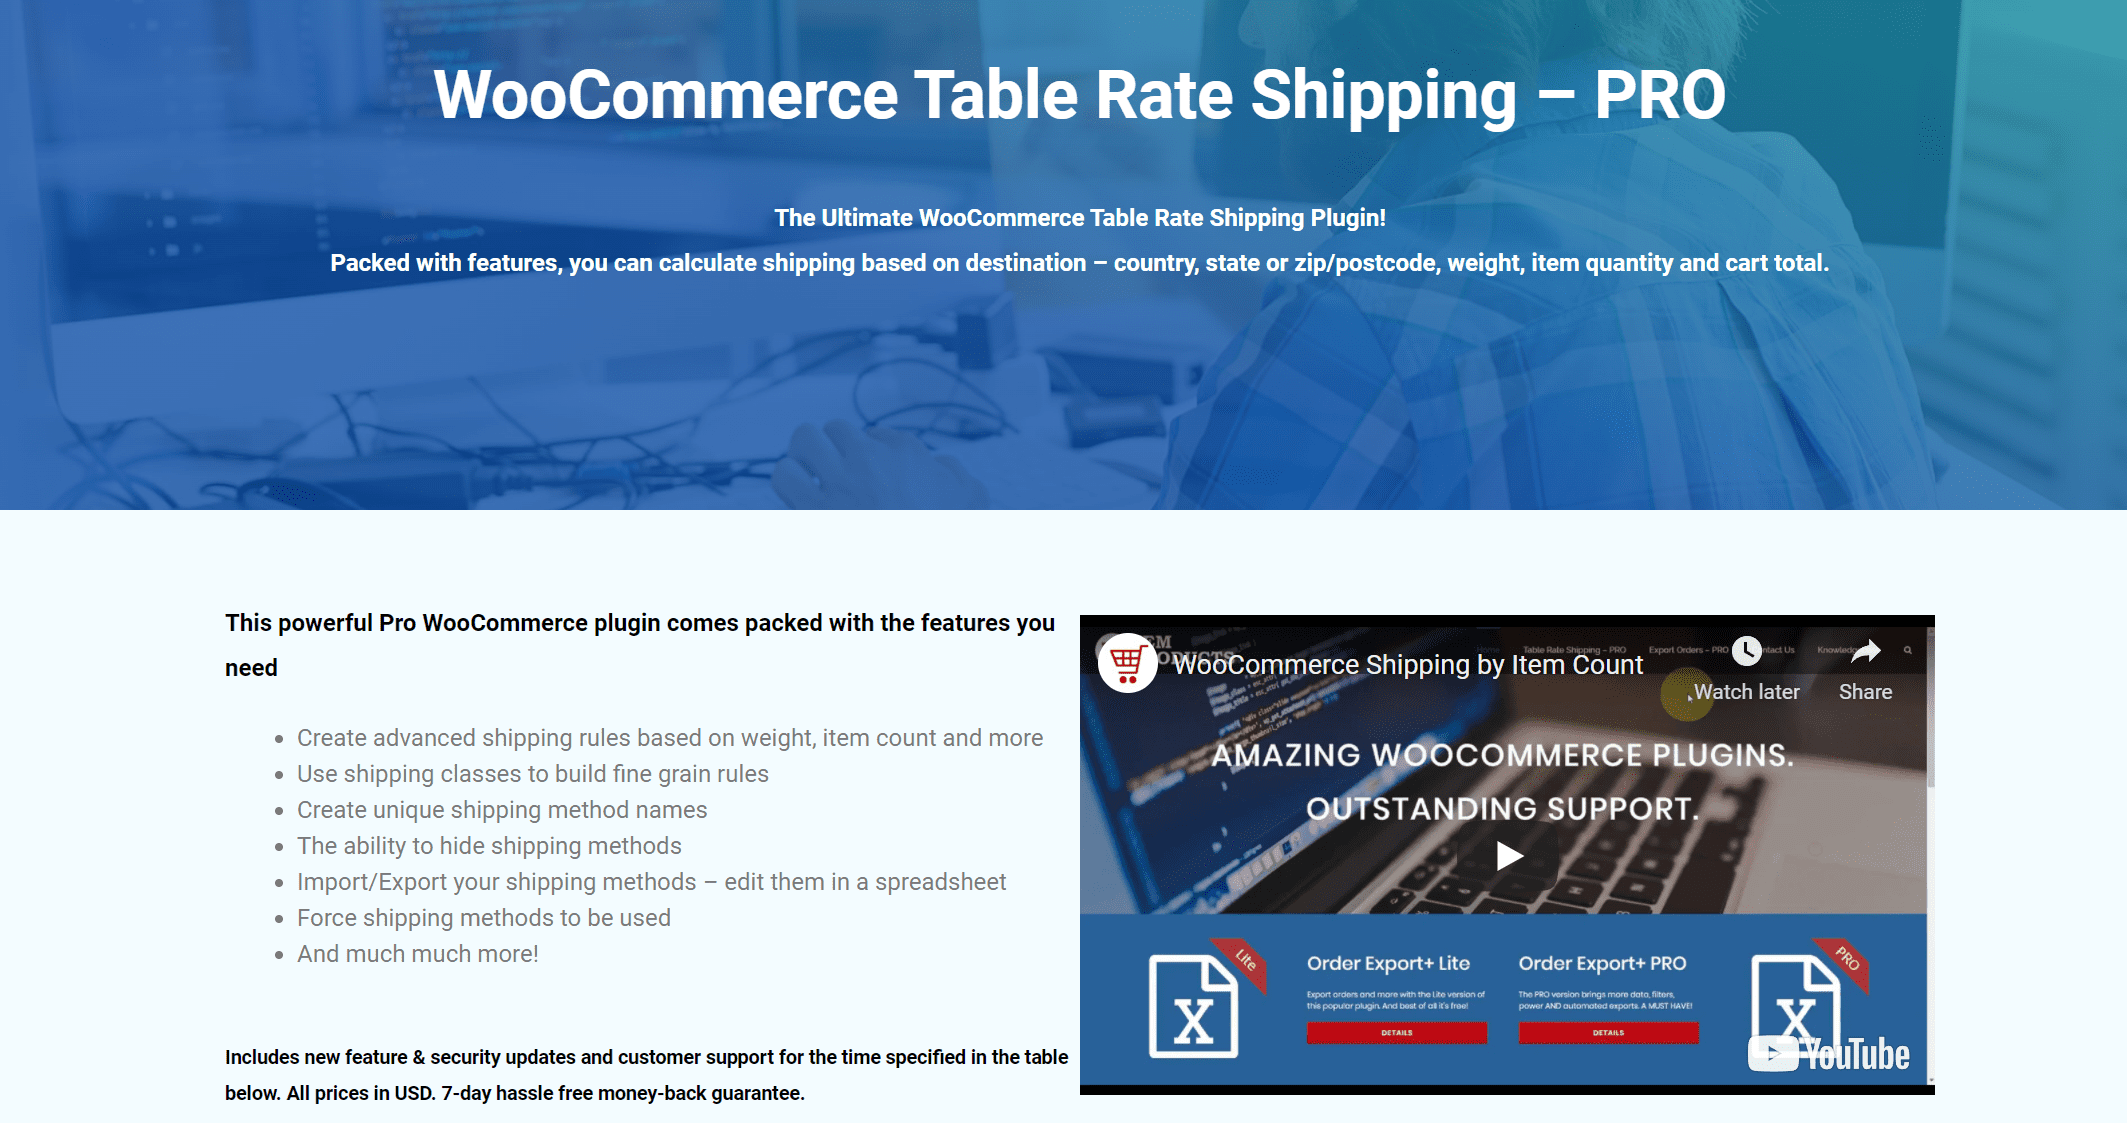 WooCommerce Table Rate Shipping PRO